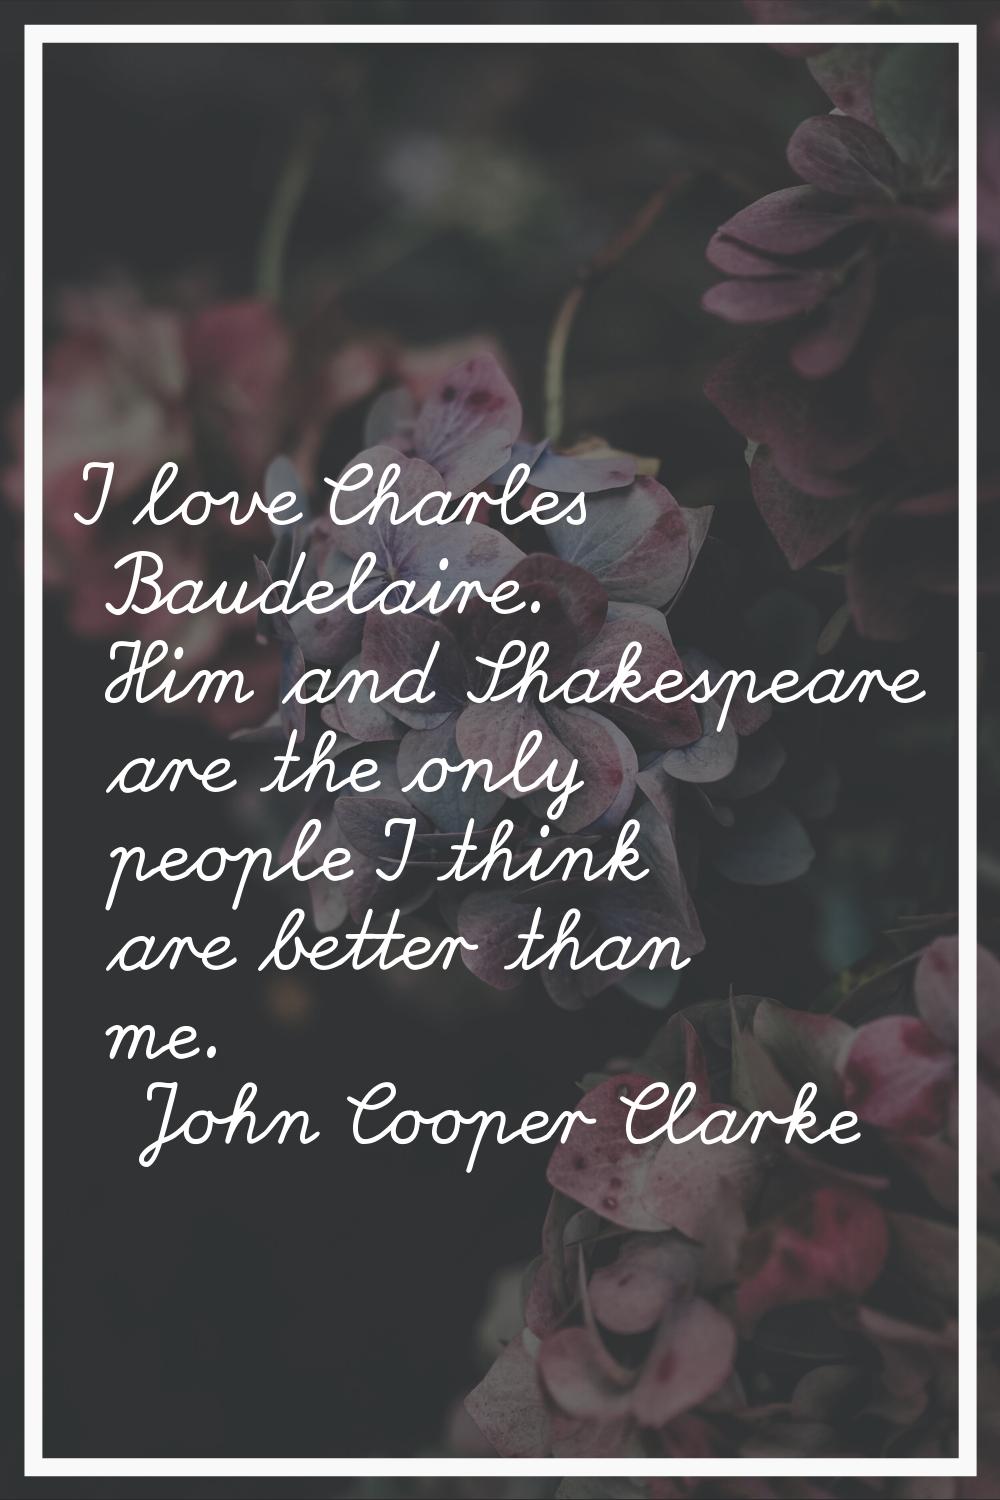 I love Charles Baudelaire. Him and Shakespeare are the only people I think are better than me.